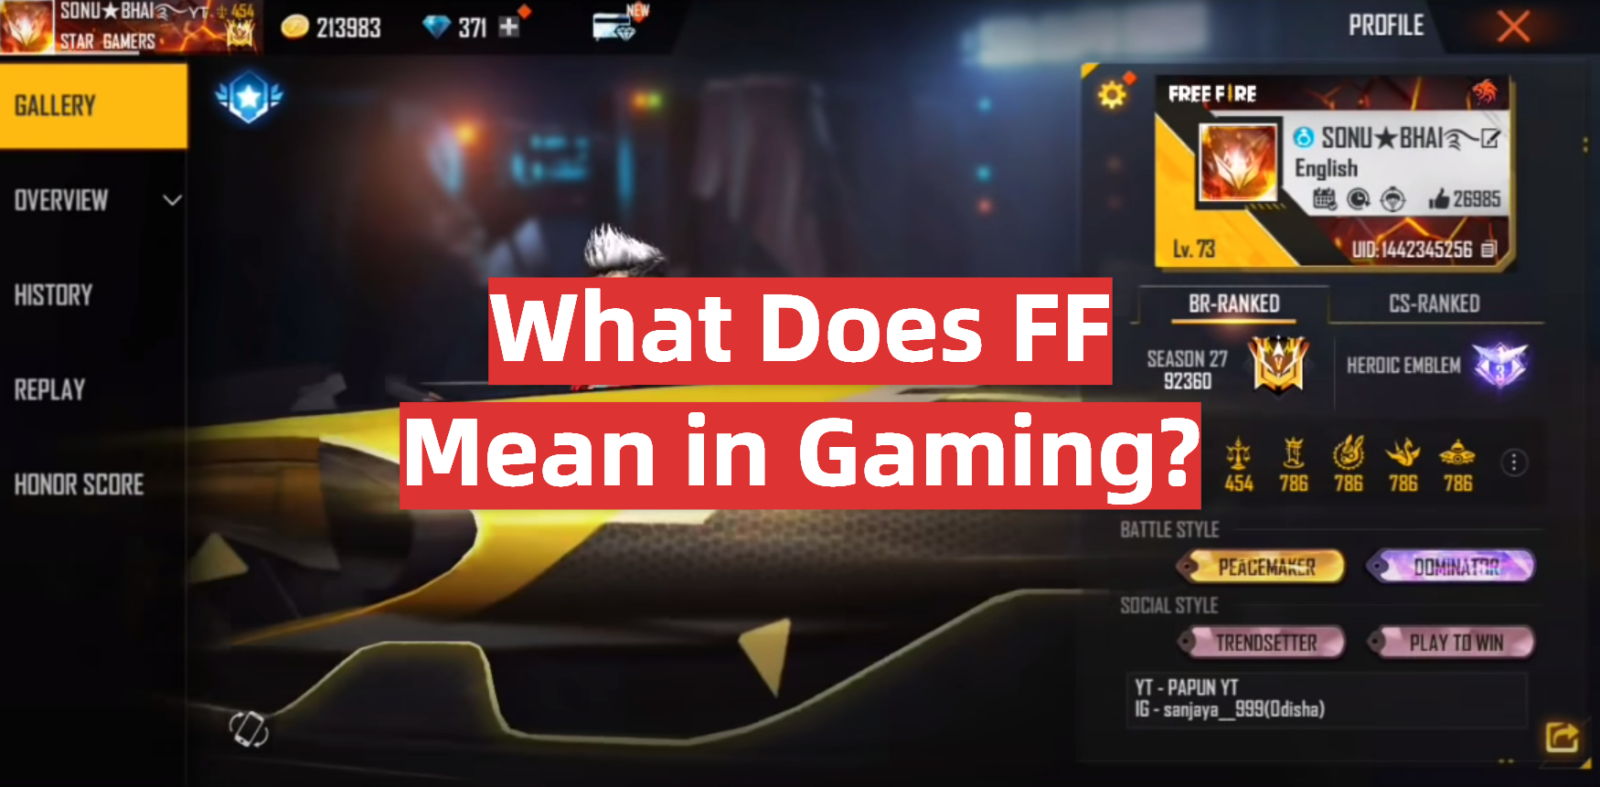 What Does FF Mean in Gaming?